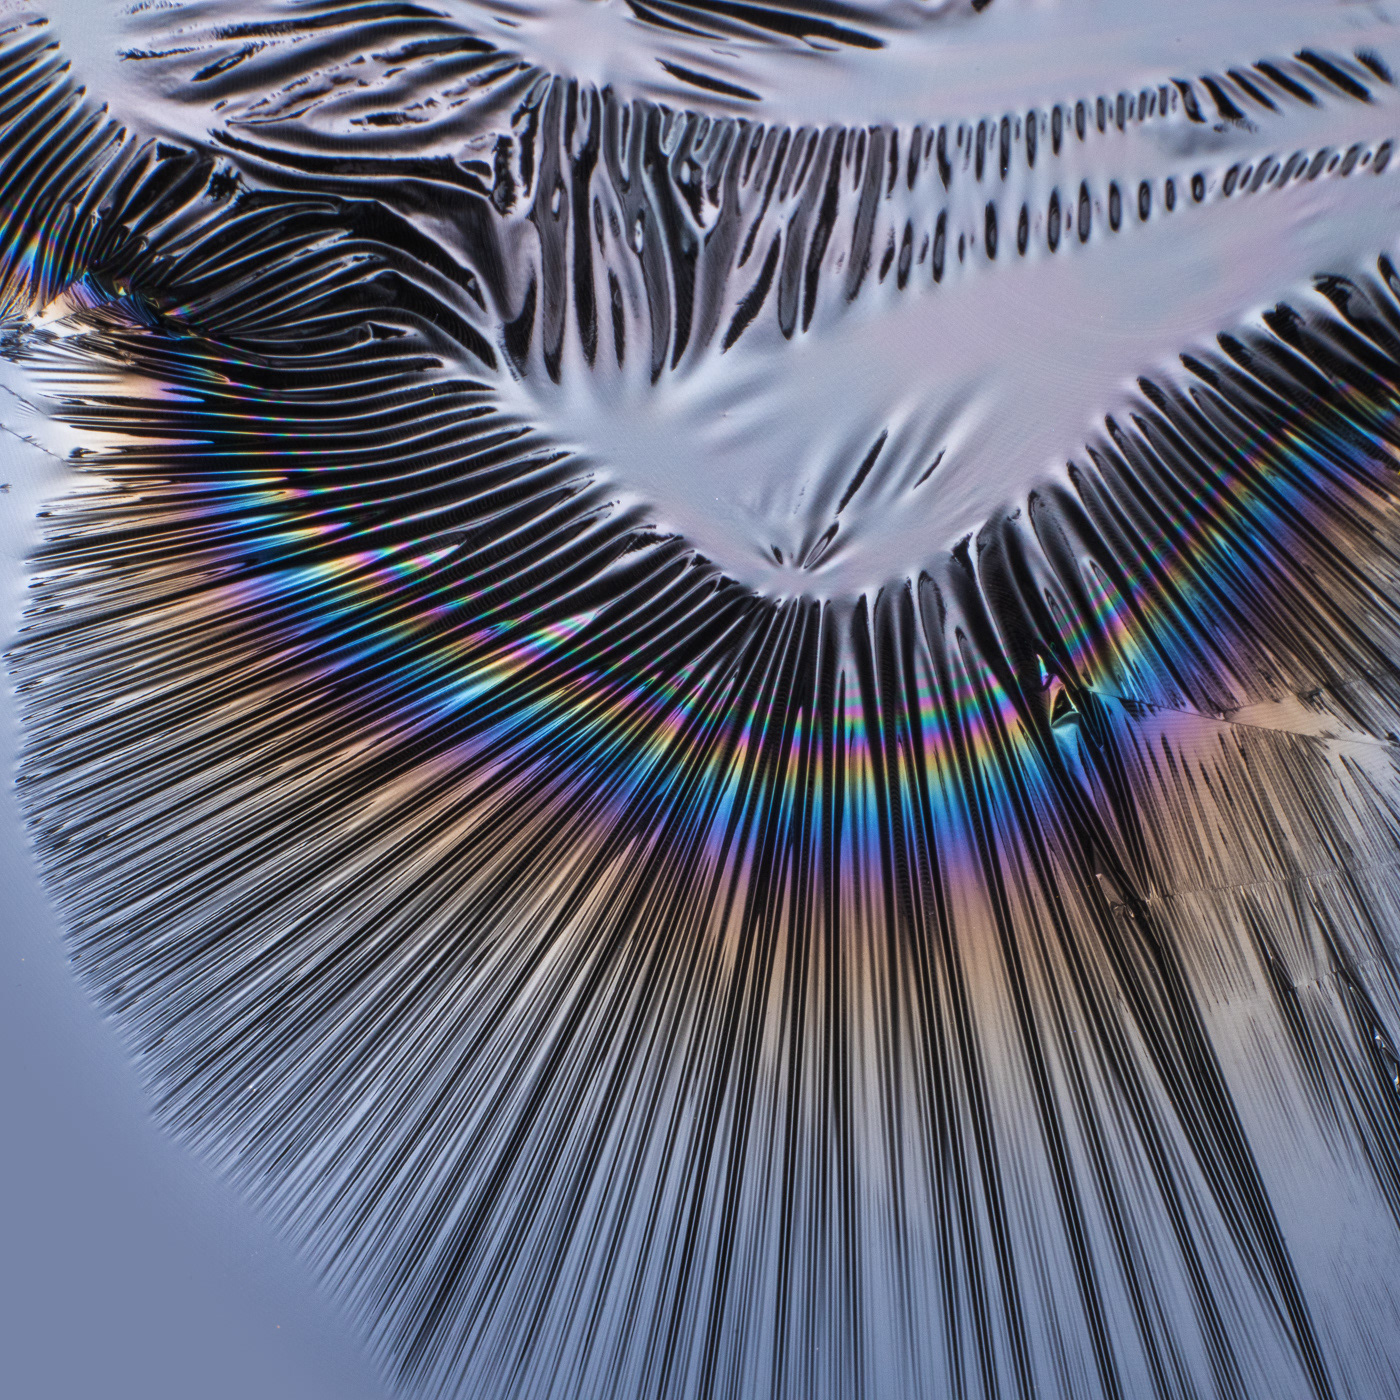 science iridescent Macro Photography rainbow chrome metallic holographic foil texture abstract